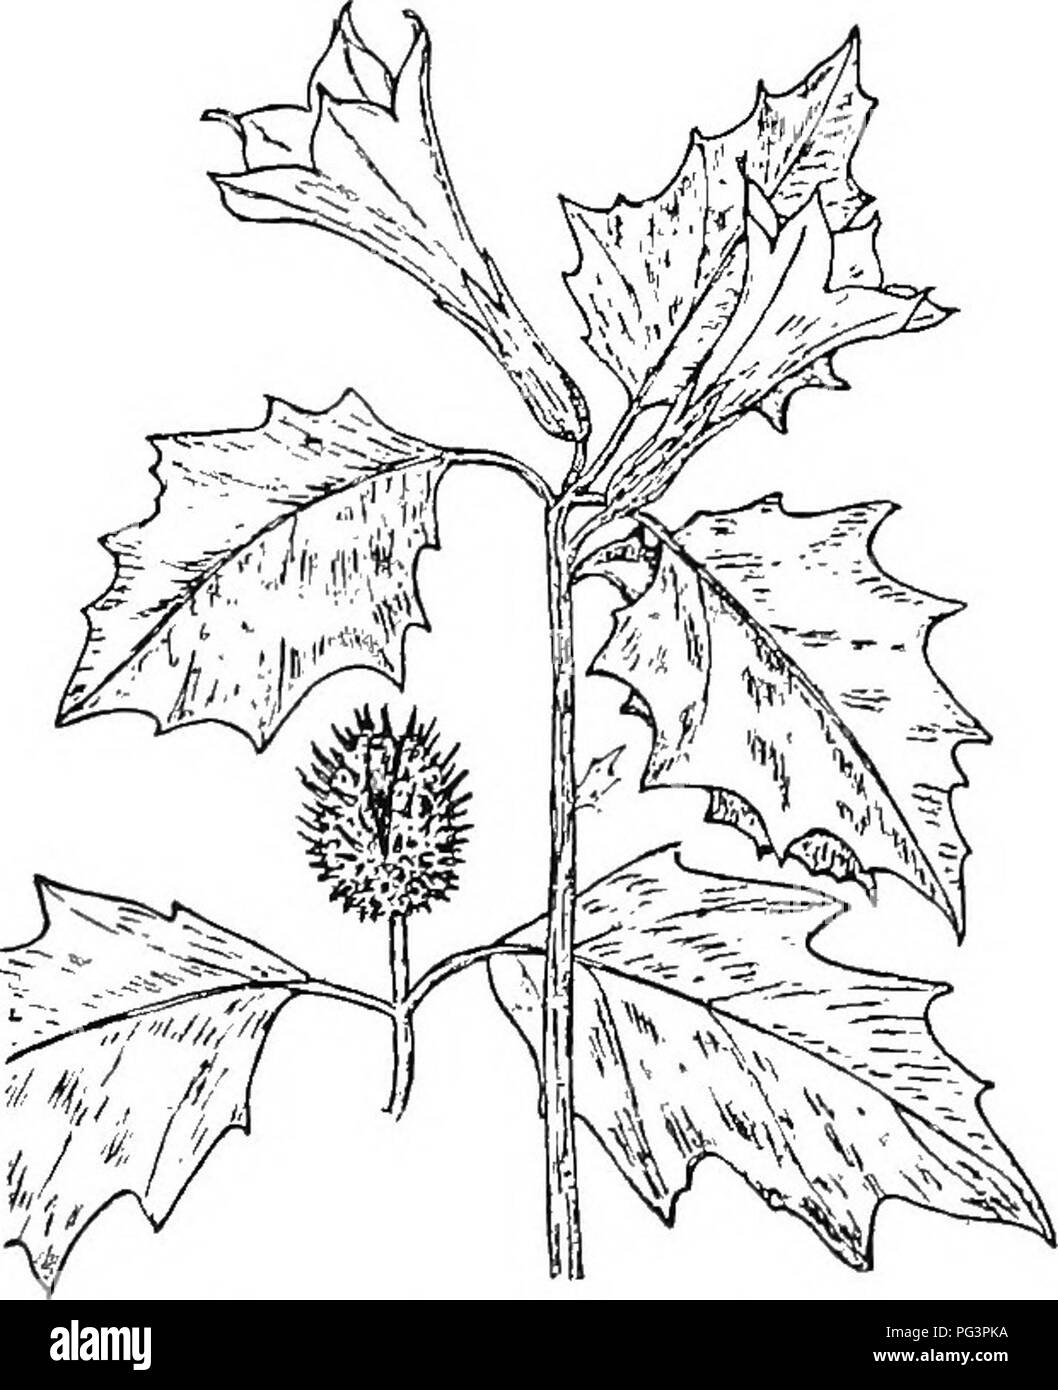 . Botany for agricultural students . Botany. Fig. 440. — A portion of a Tomato plant bearing flowers and fruits, and also a flower enlarged to show the structure of the flower. dodendrons and Heathers. The Traihng Arbutus (Epigaea), which is the favorite spring flower wherever it grows, and the Madrona, one of the most beautiful trees of the Pacific coast, belong to this family. Sweet Potato Family (Convolvulaceae). — The plants of this family are chiefly trailing or twining herbs. Their flowers, as those of the Morning Glory illustrate, are often quite showy. They have five stamens, and their Stock Photo